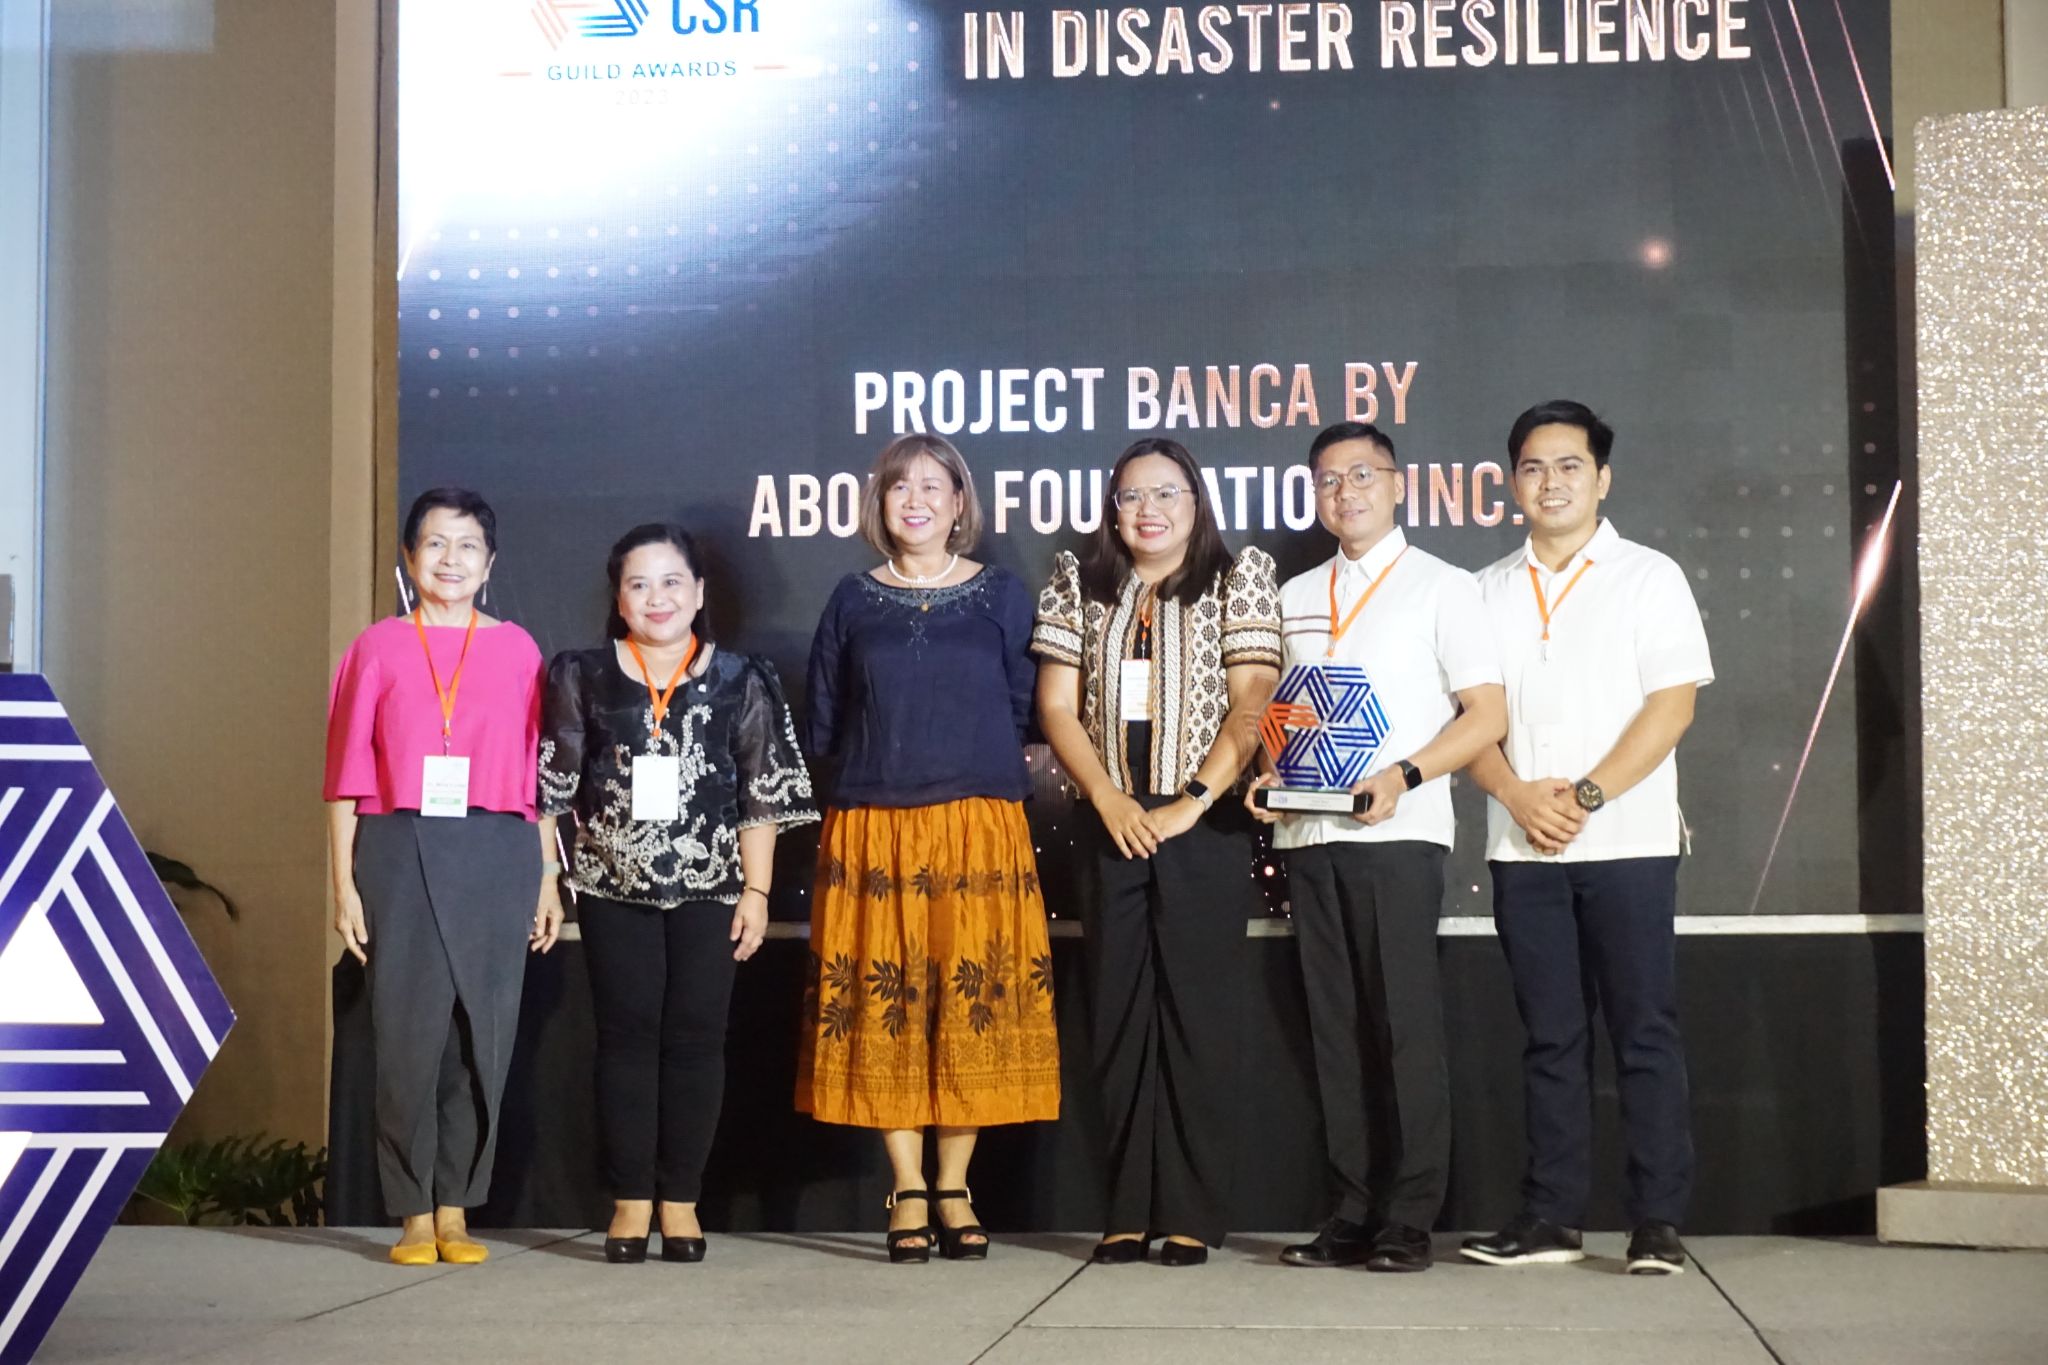 Aboitiz Foundation’s “Project Banca” Honored as Outstanding CSR Project in Disaster Resilience